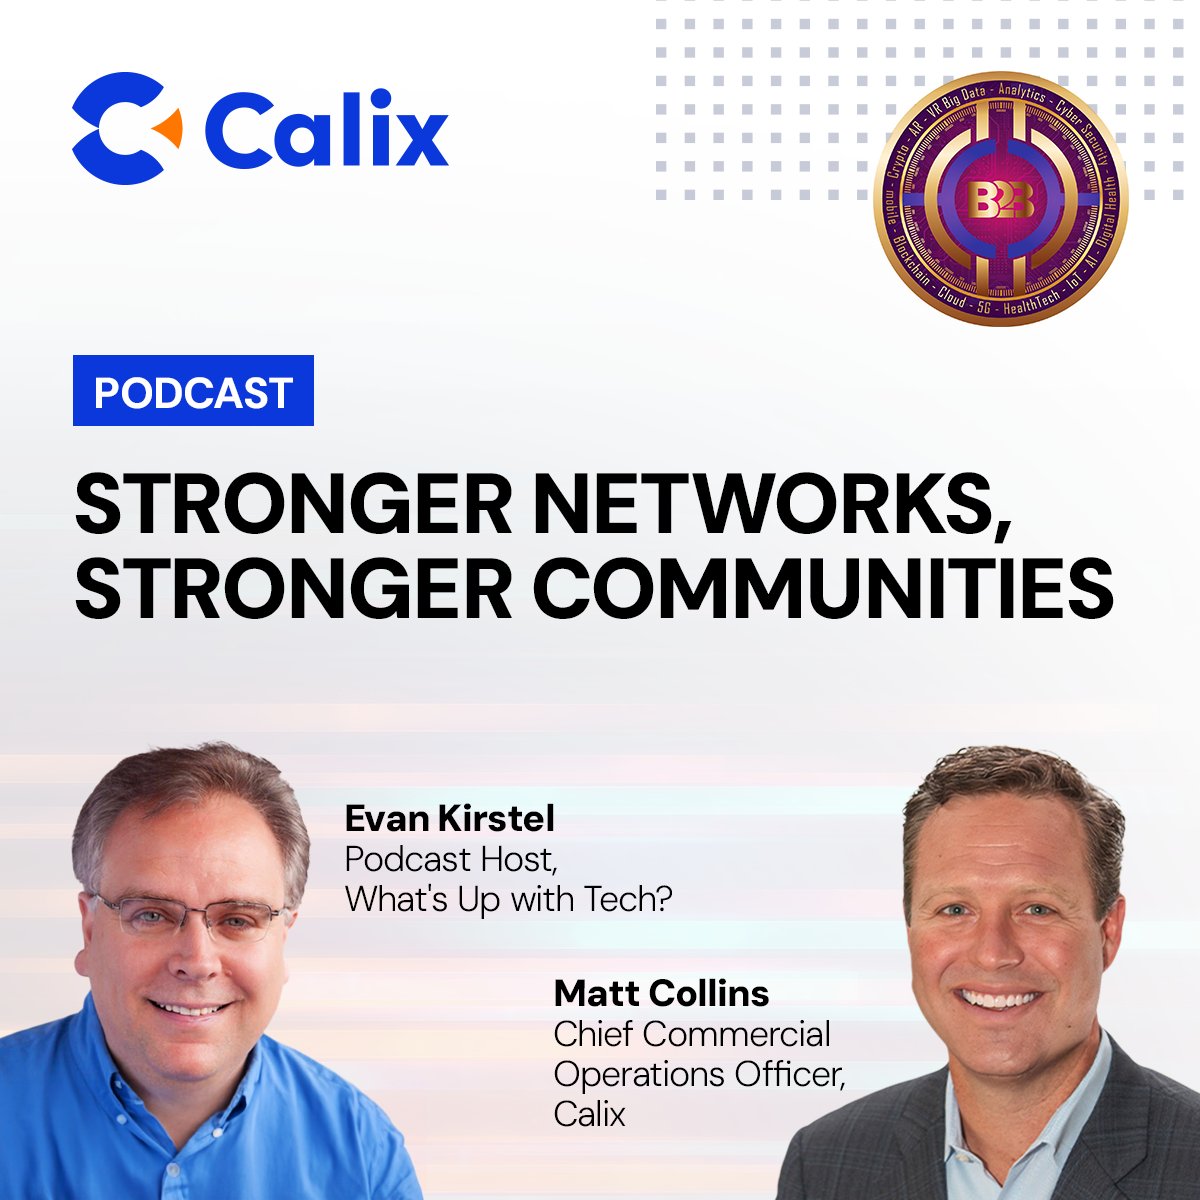 Matt Collins, chief commercial operations officer at Calix, joined @EvanKirstel on the 'What’s up with Tech’ podcast to discuss how Calix transformed its business to enable customers to leverage the end-to-end broadband platform. Watch the replay! 🔗ow.ly/PgEn50RnBay